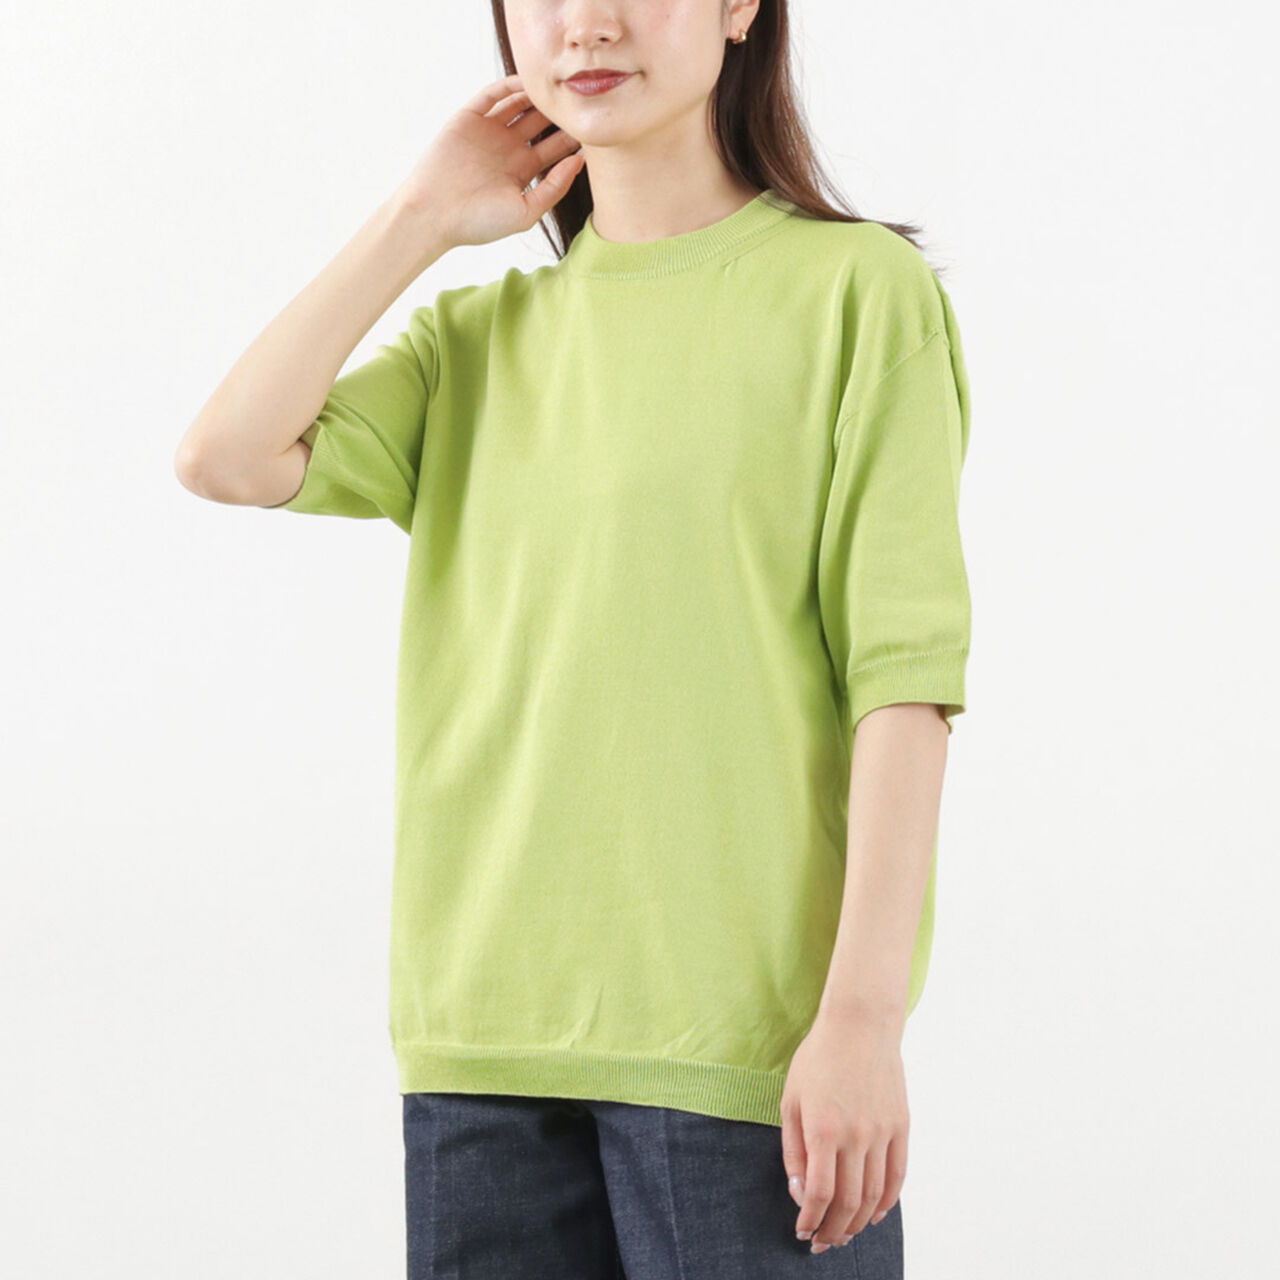 Cotton Fitted Seamless Knit Tee,Green, large image number 0